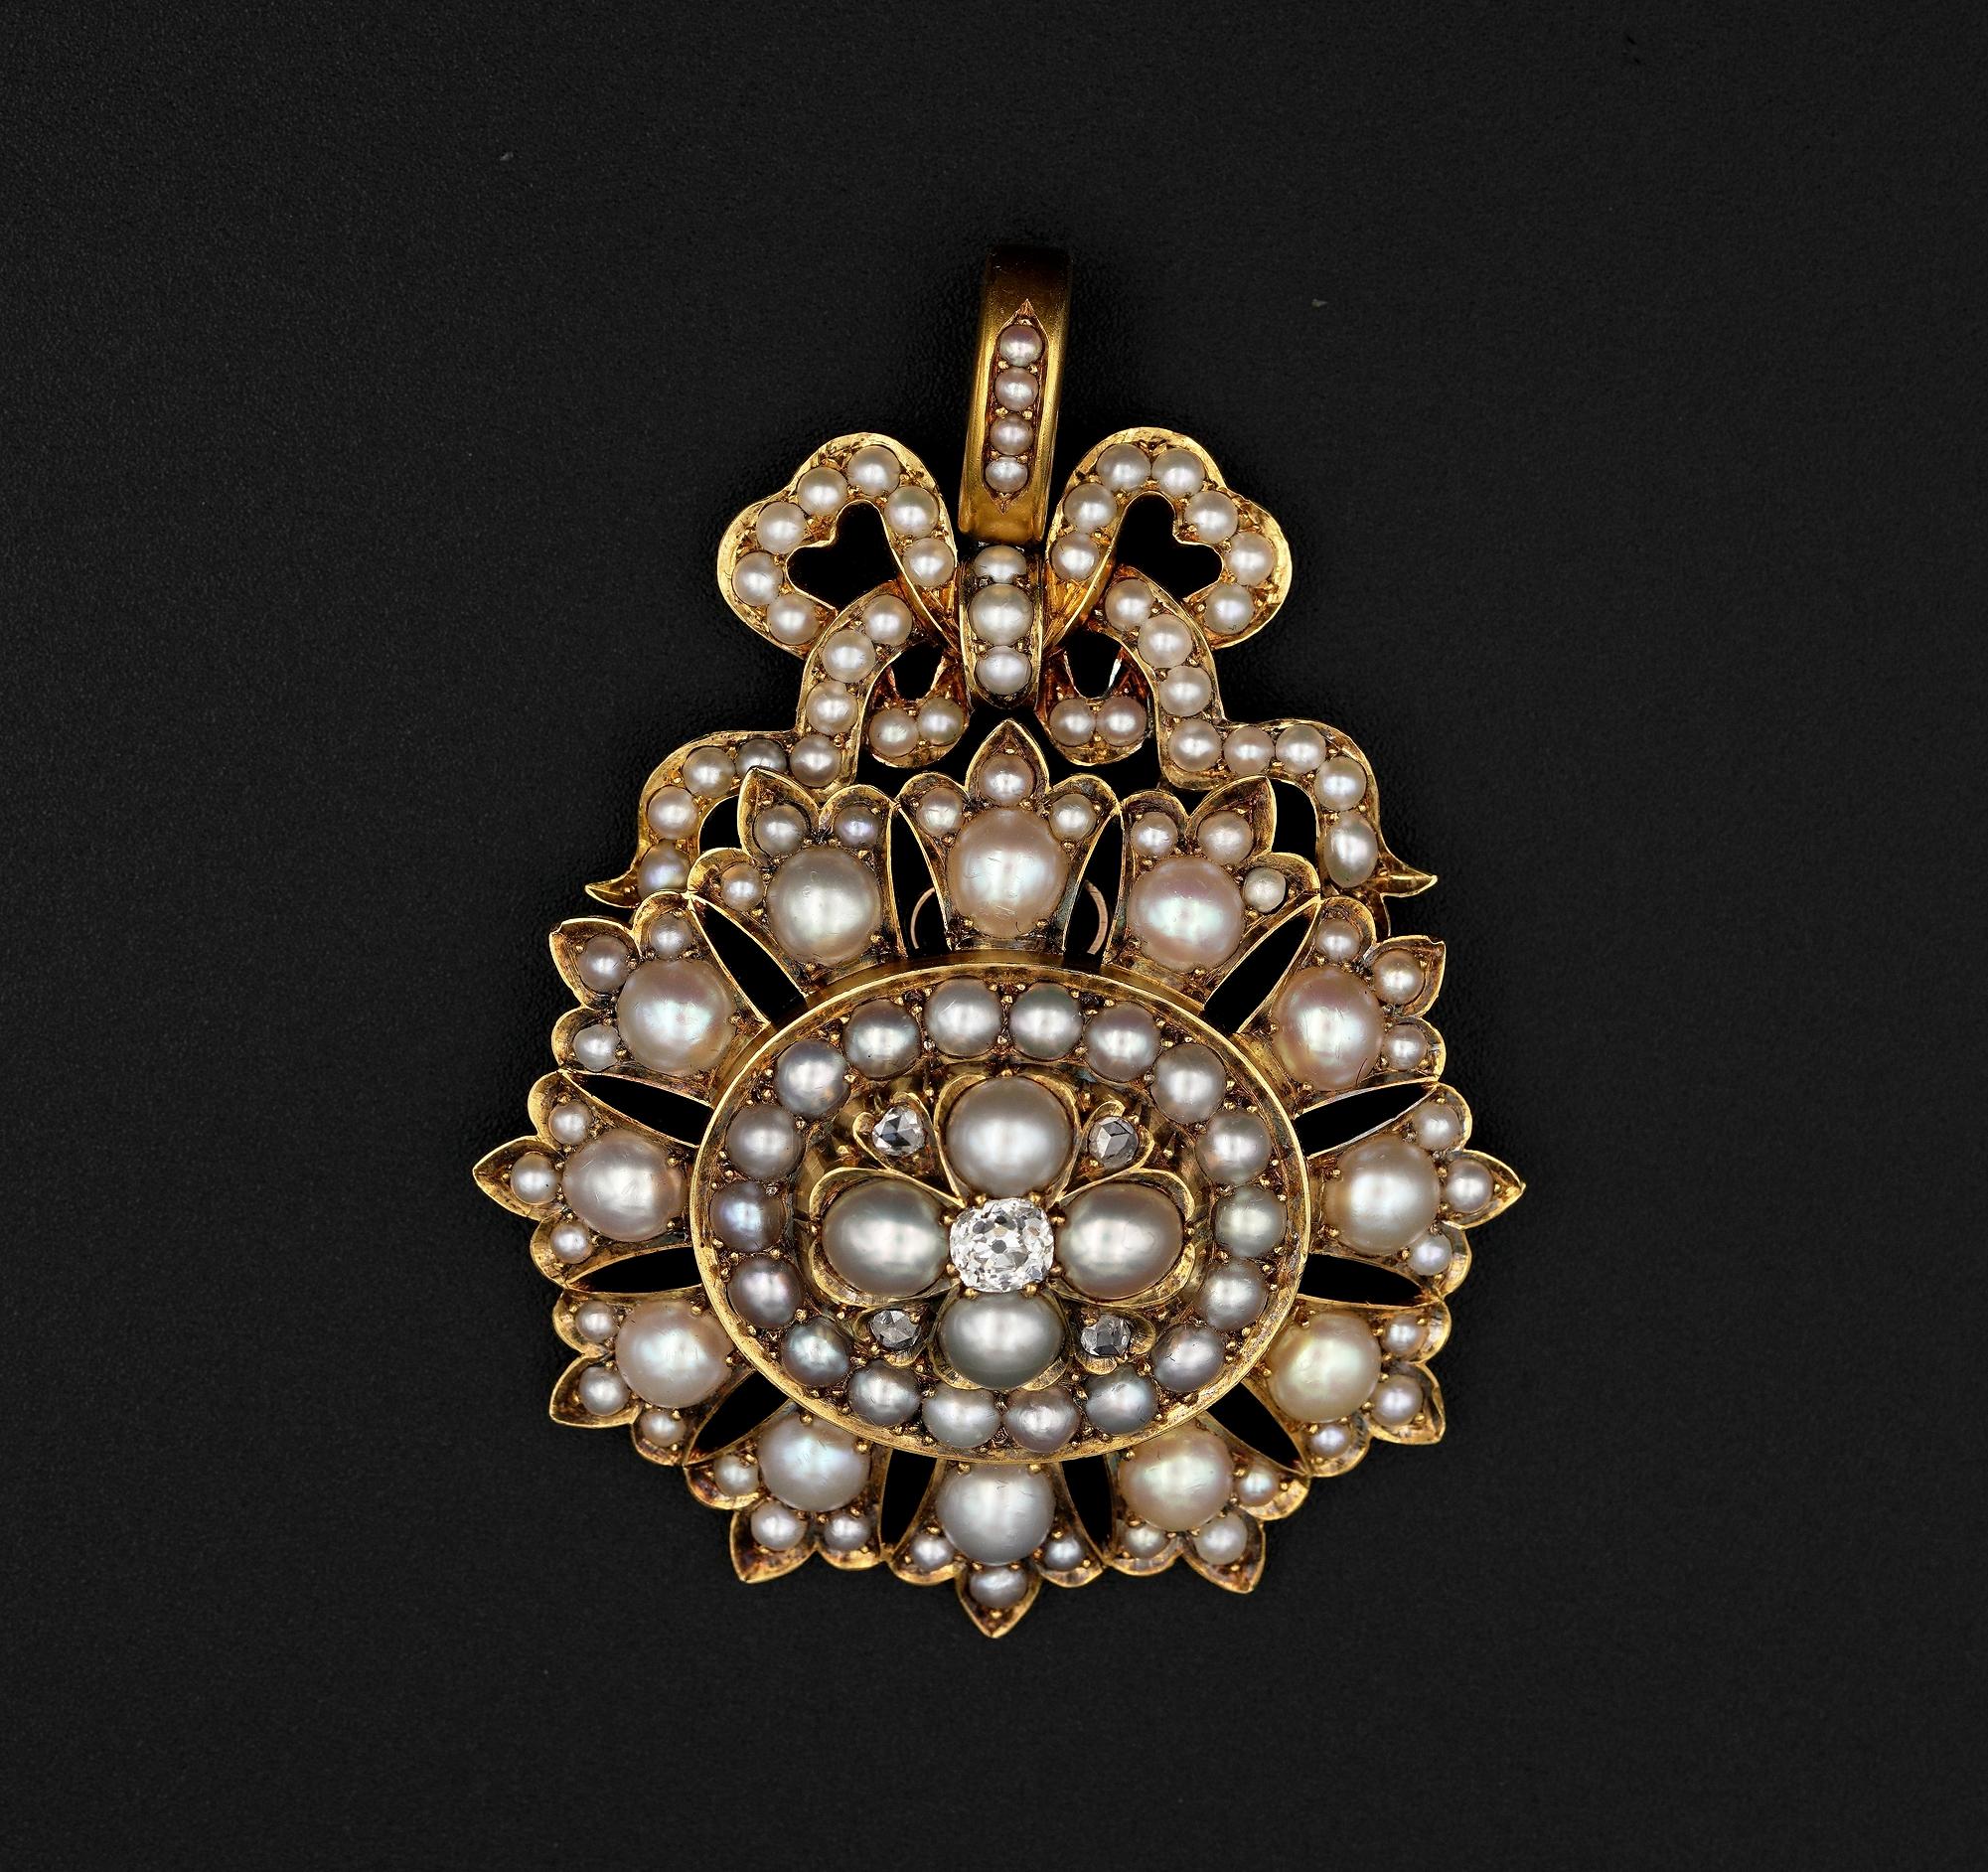 Victorian Romanticism
Exquisite Victorian period large and outstanding pendant part of the sentimental, romantic period – English origin 1860 ca, crafted of solid 18 KT gold
Large oval pierced work main body, topped by a charming bow, completely